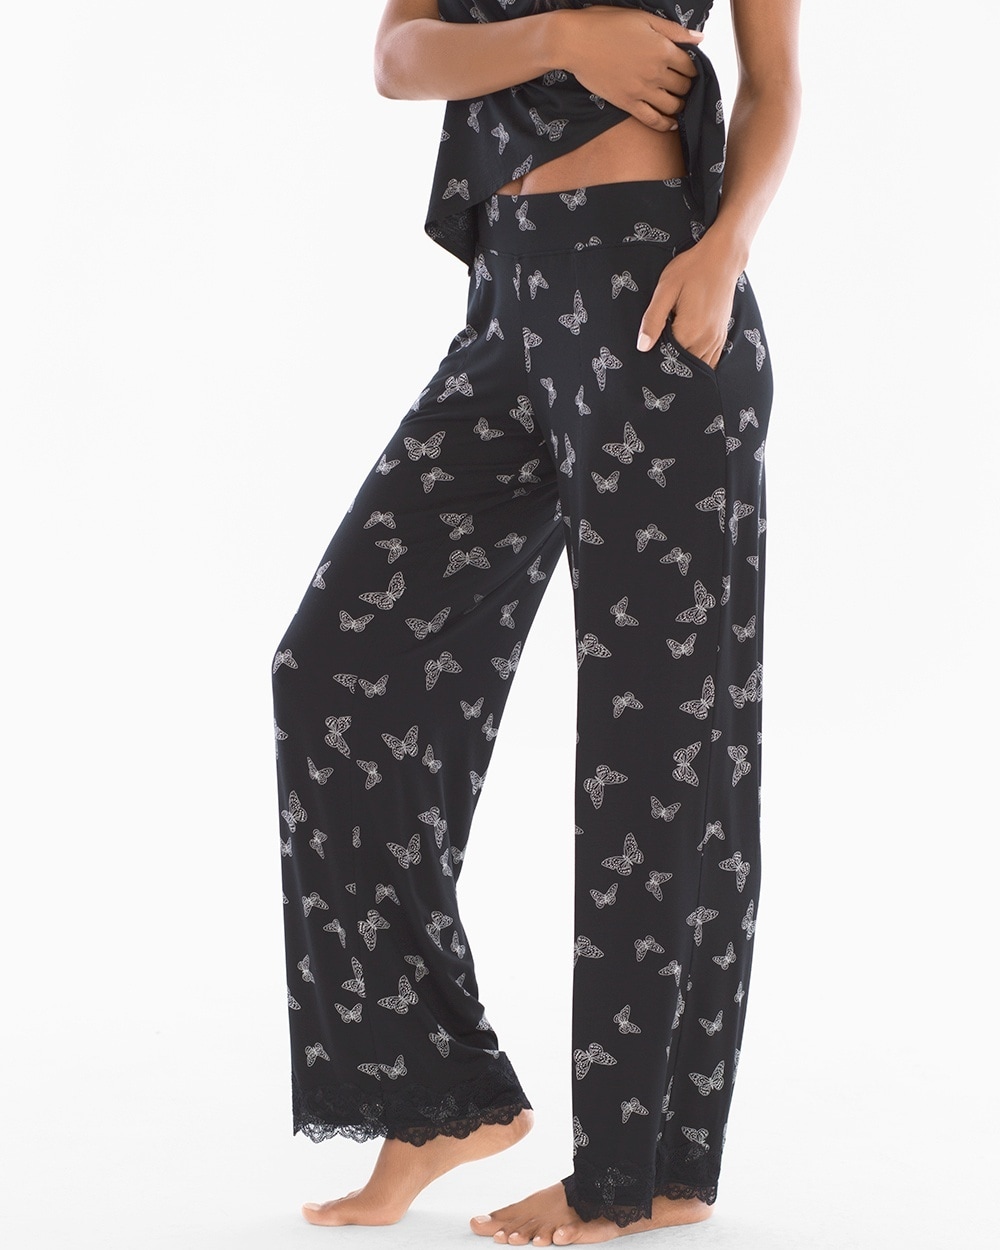 Cool Nights Lace Trim Pajama Pants Fancy Free Allover Black